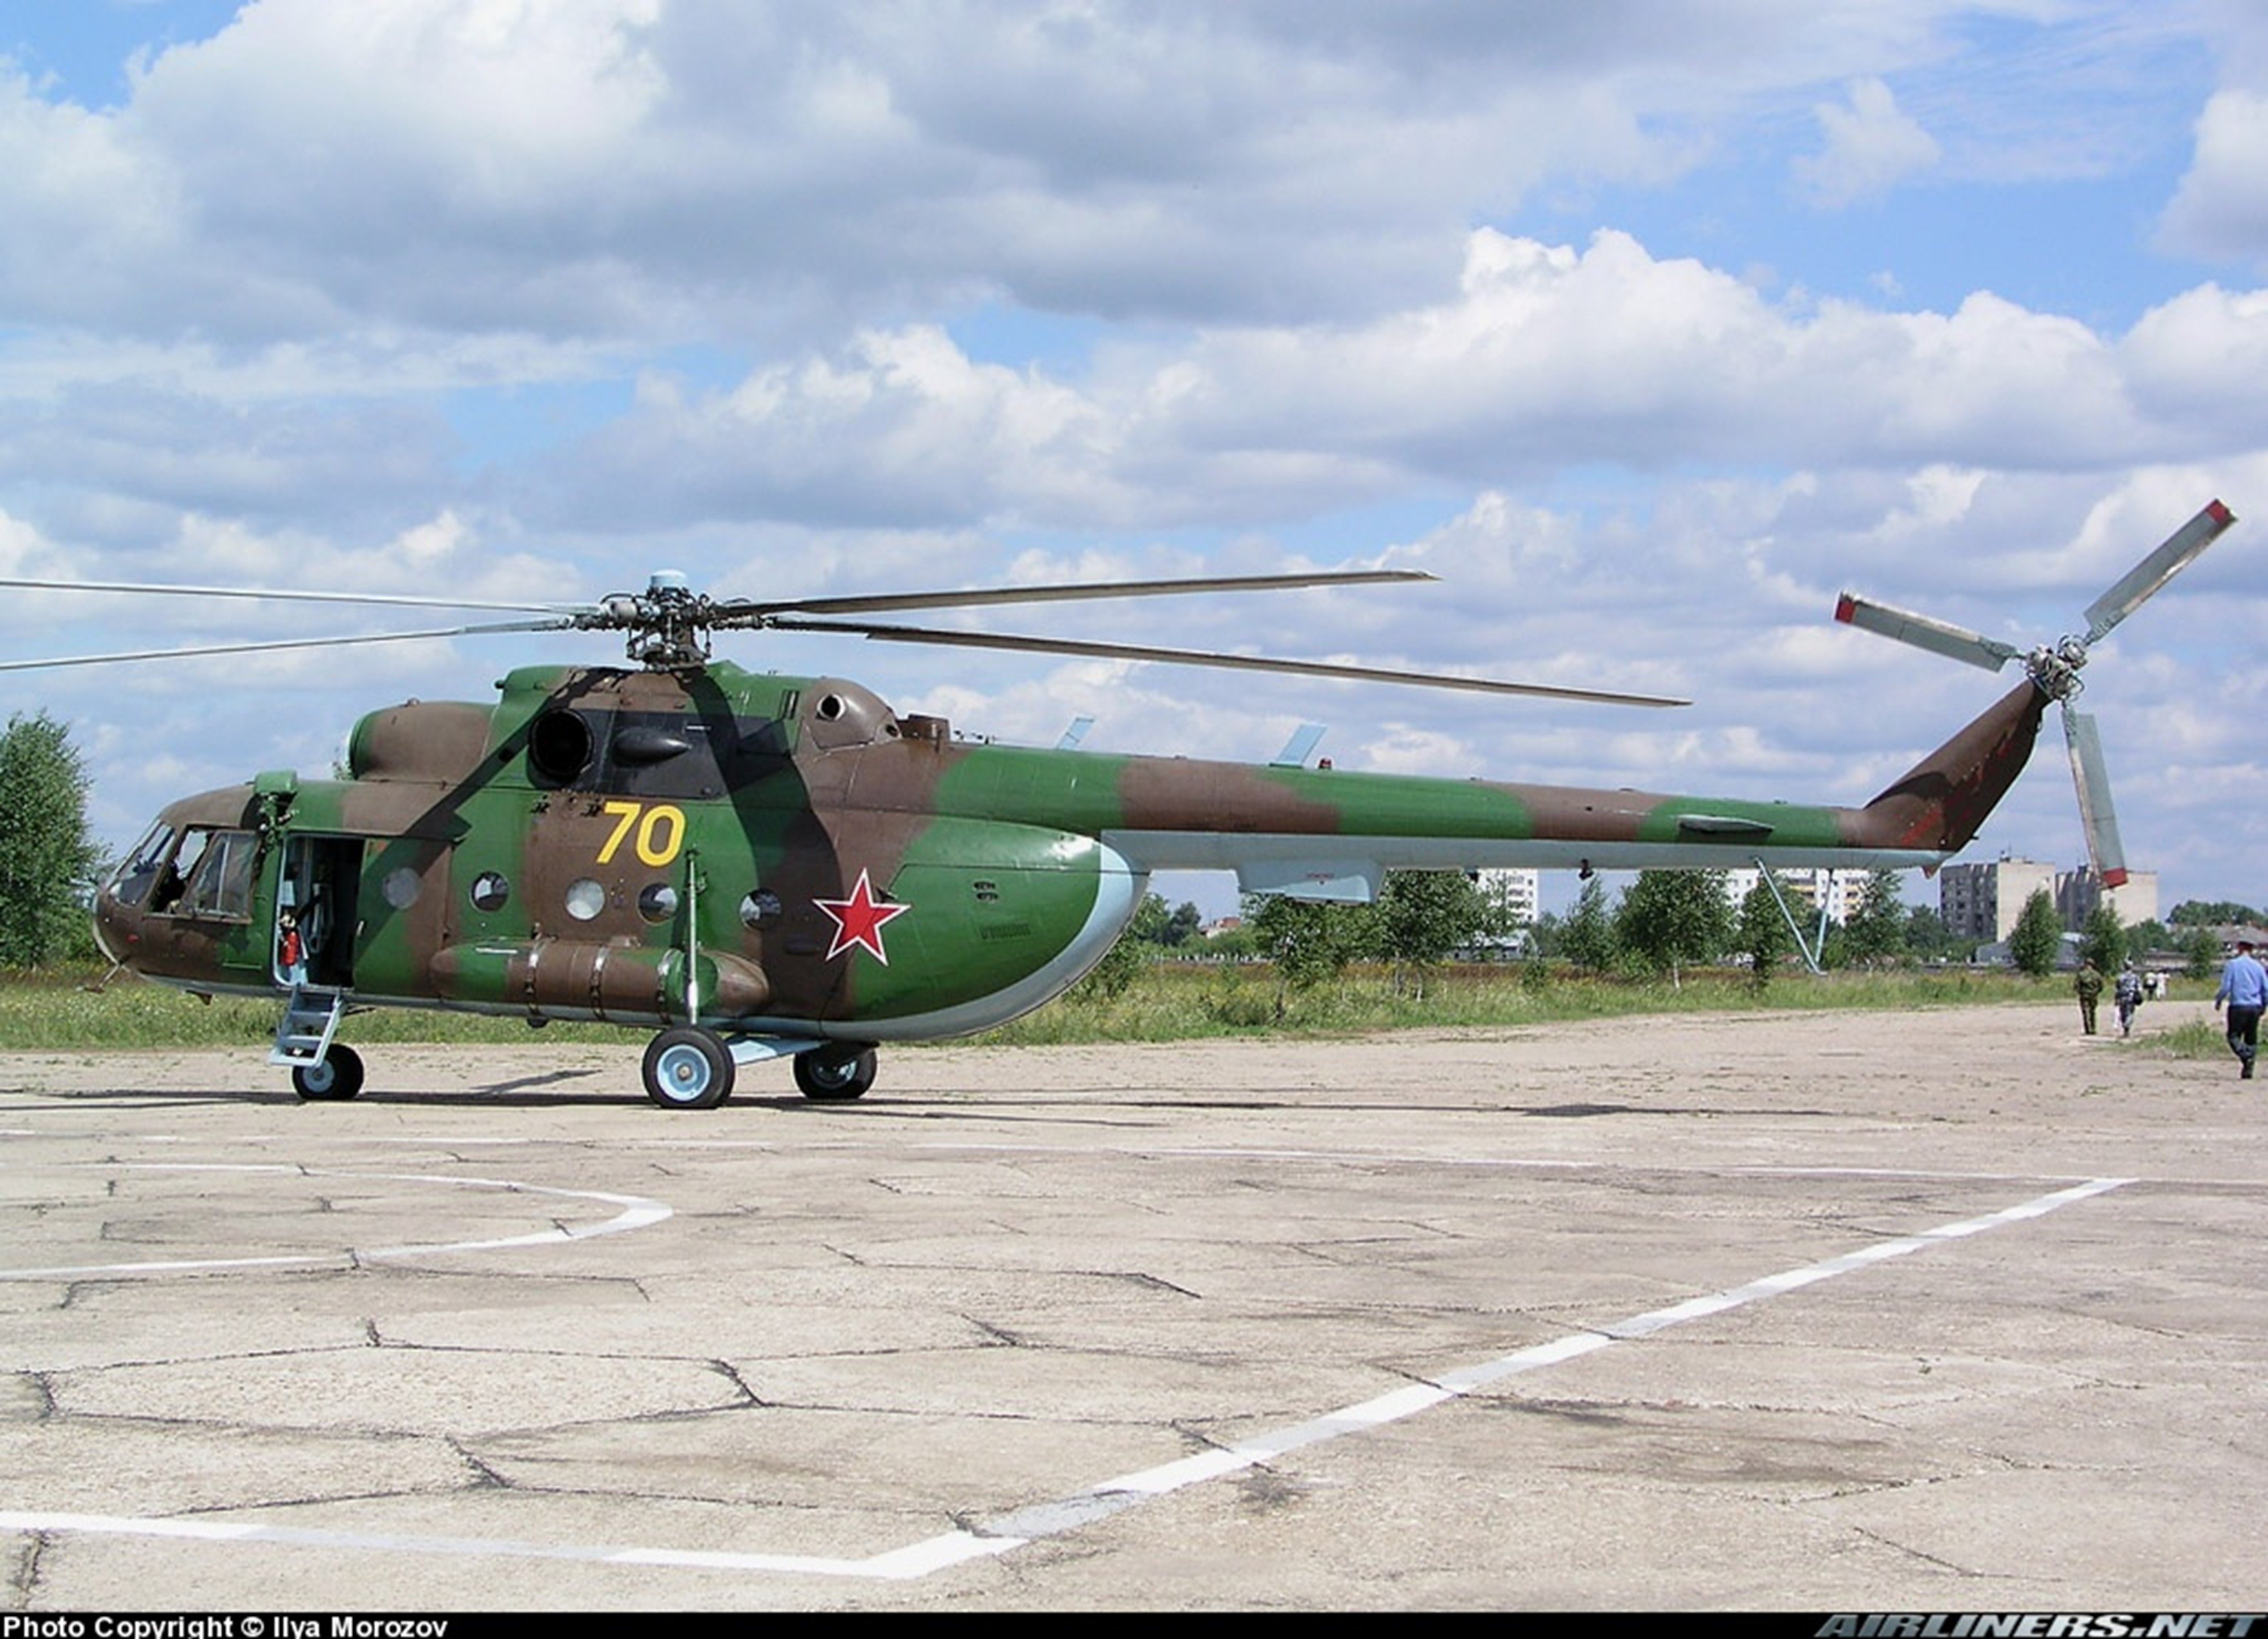 russian, Red, Star, Russia, Helicopter, Aircraft, Transport, Mil mi, Military, Army Wallpaper